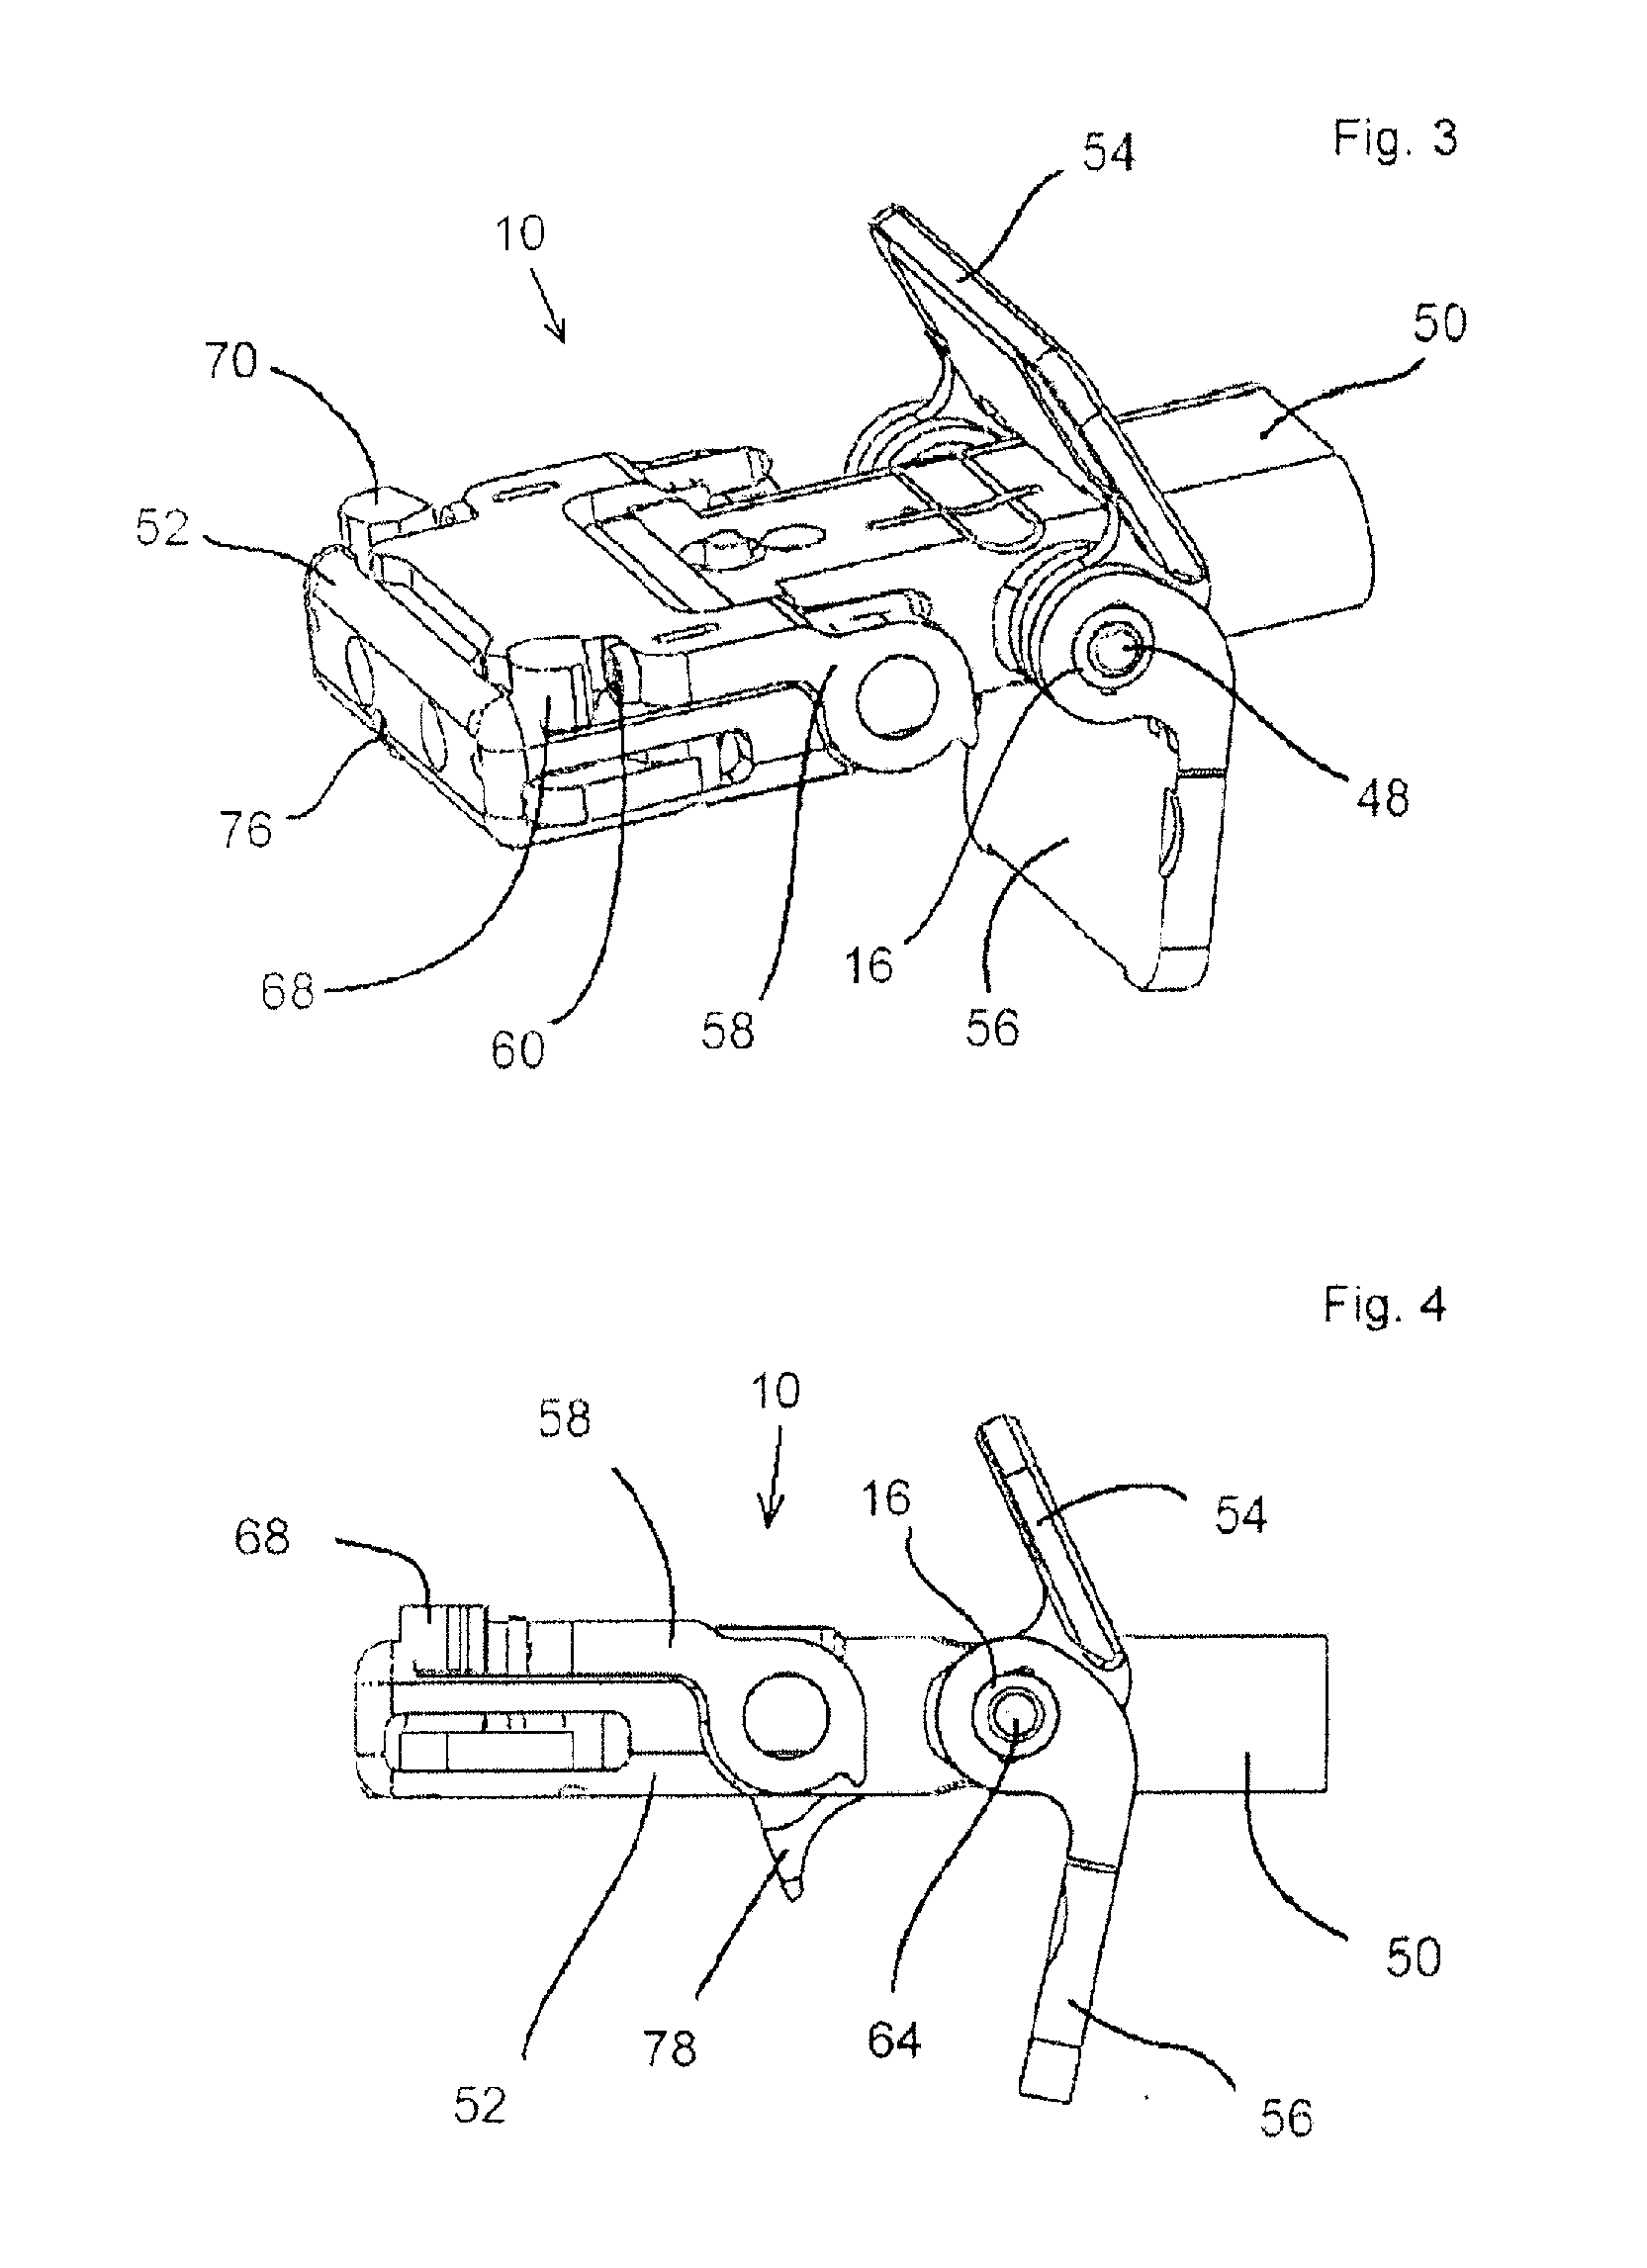 Collapsible pistol